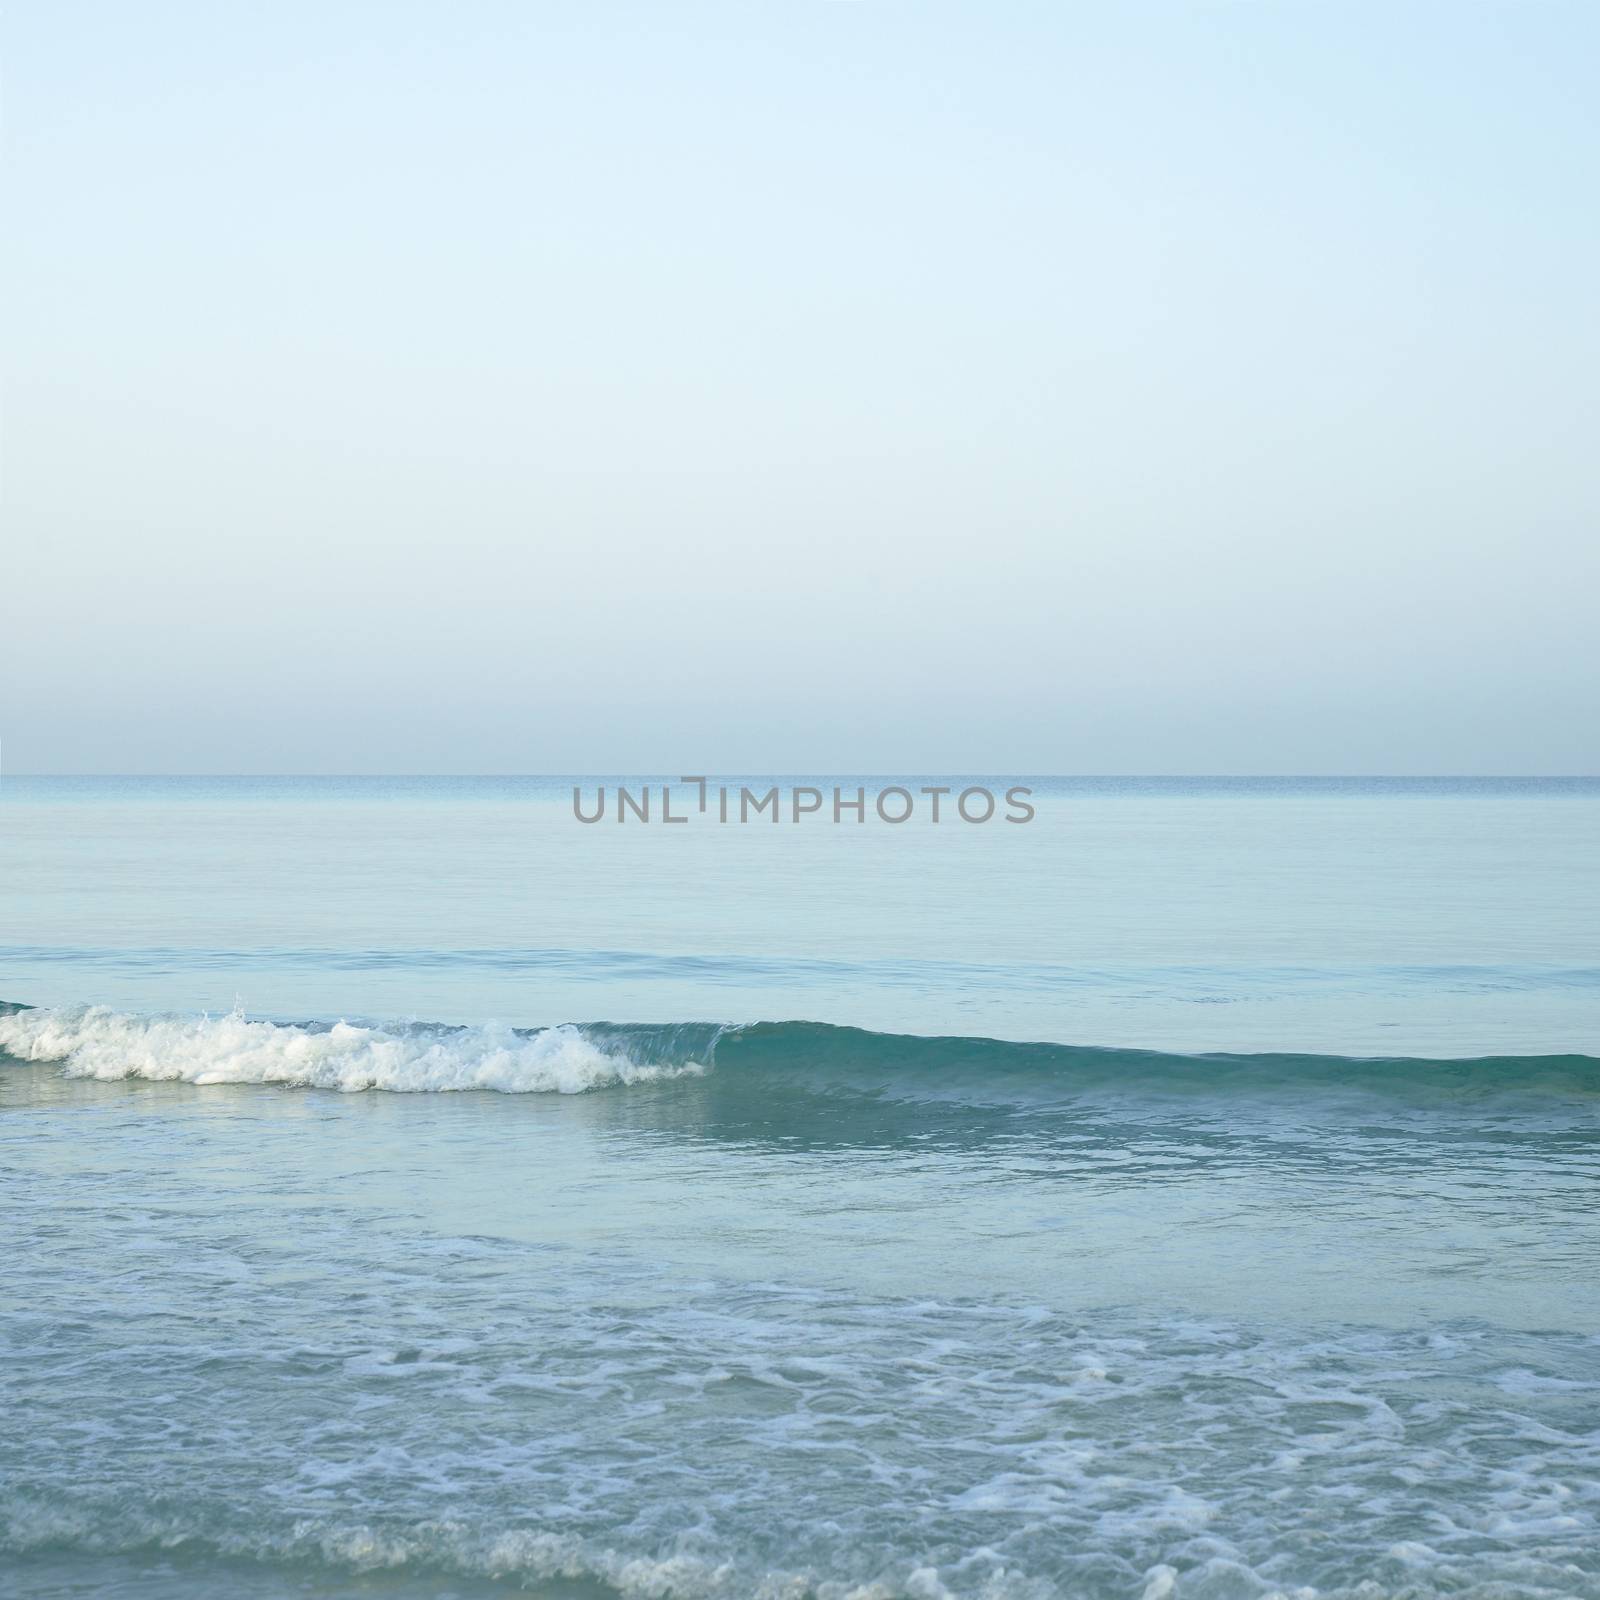 Turquoise tropical ocean and sandy beach